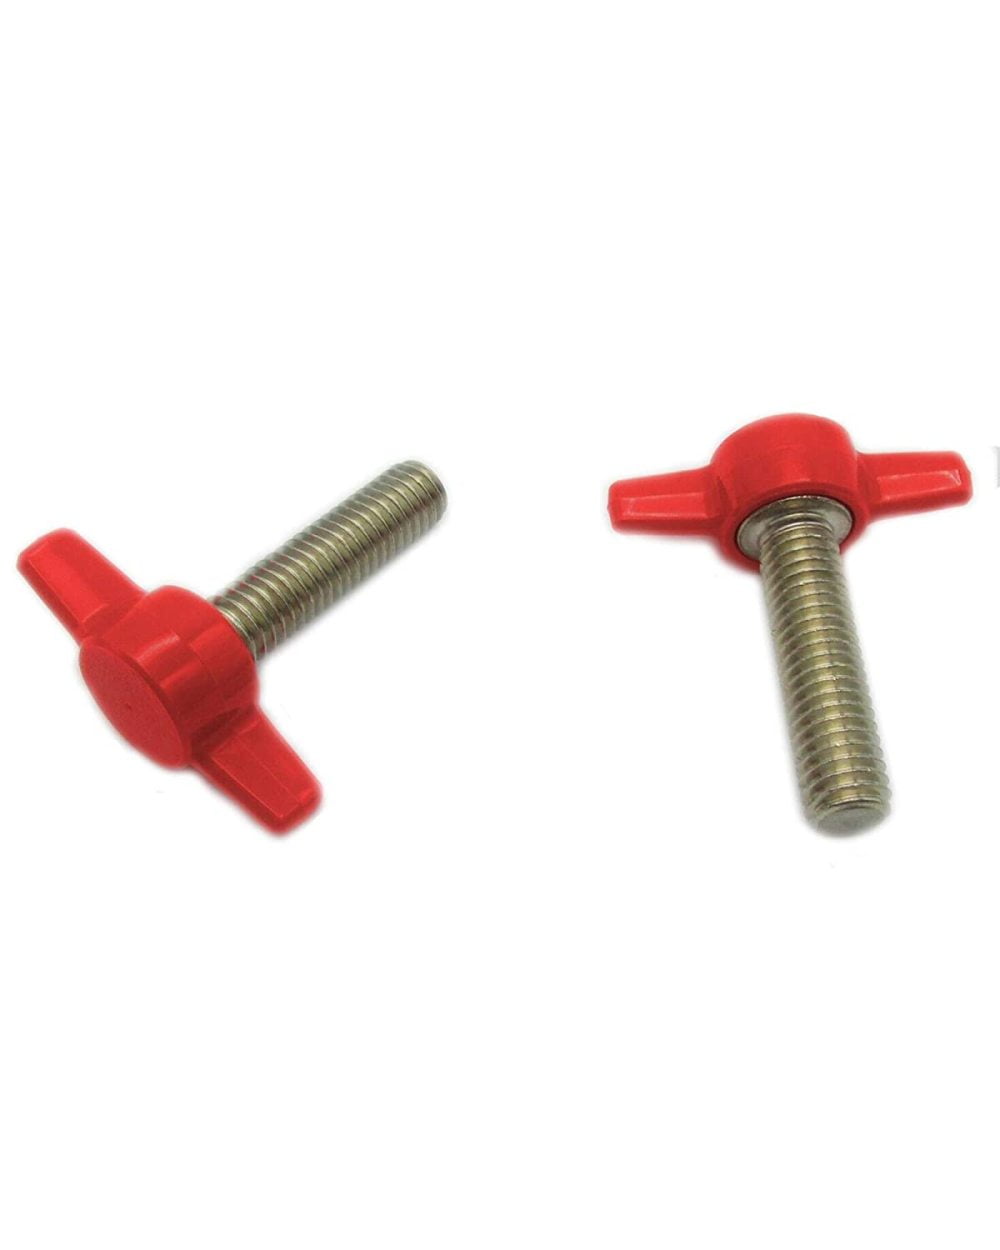 5/16" Thumb Screw Bolts with Red Butterfly Tee Wing Knob Plastic Grip 